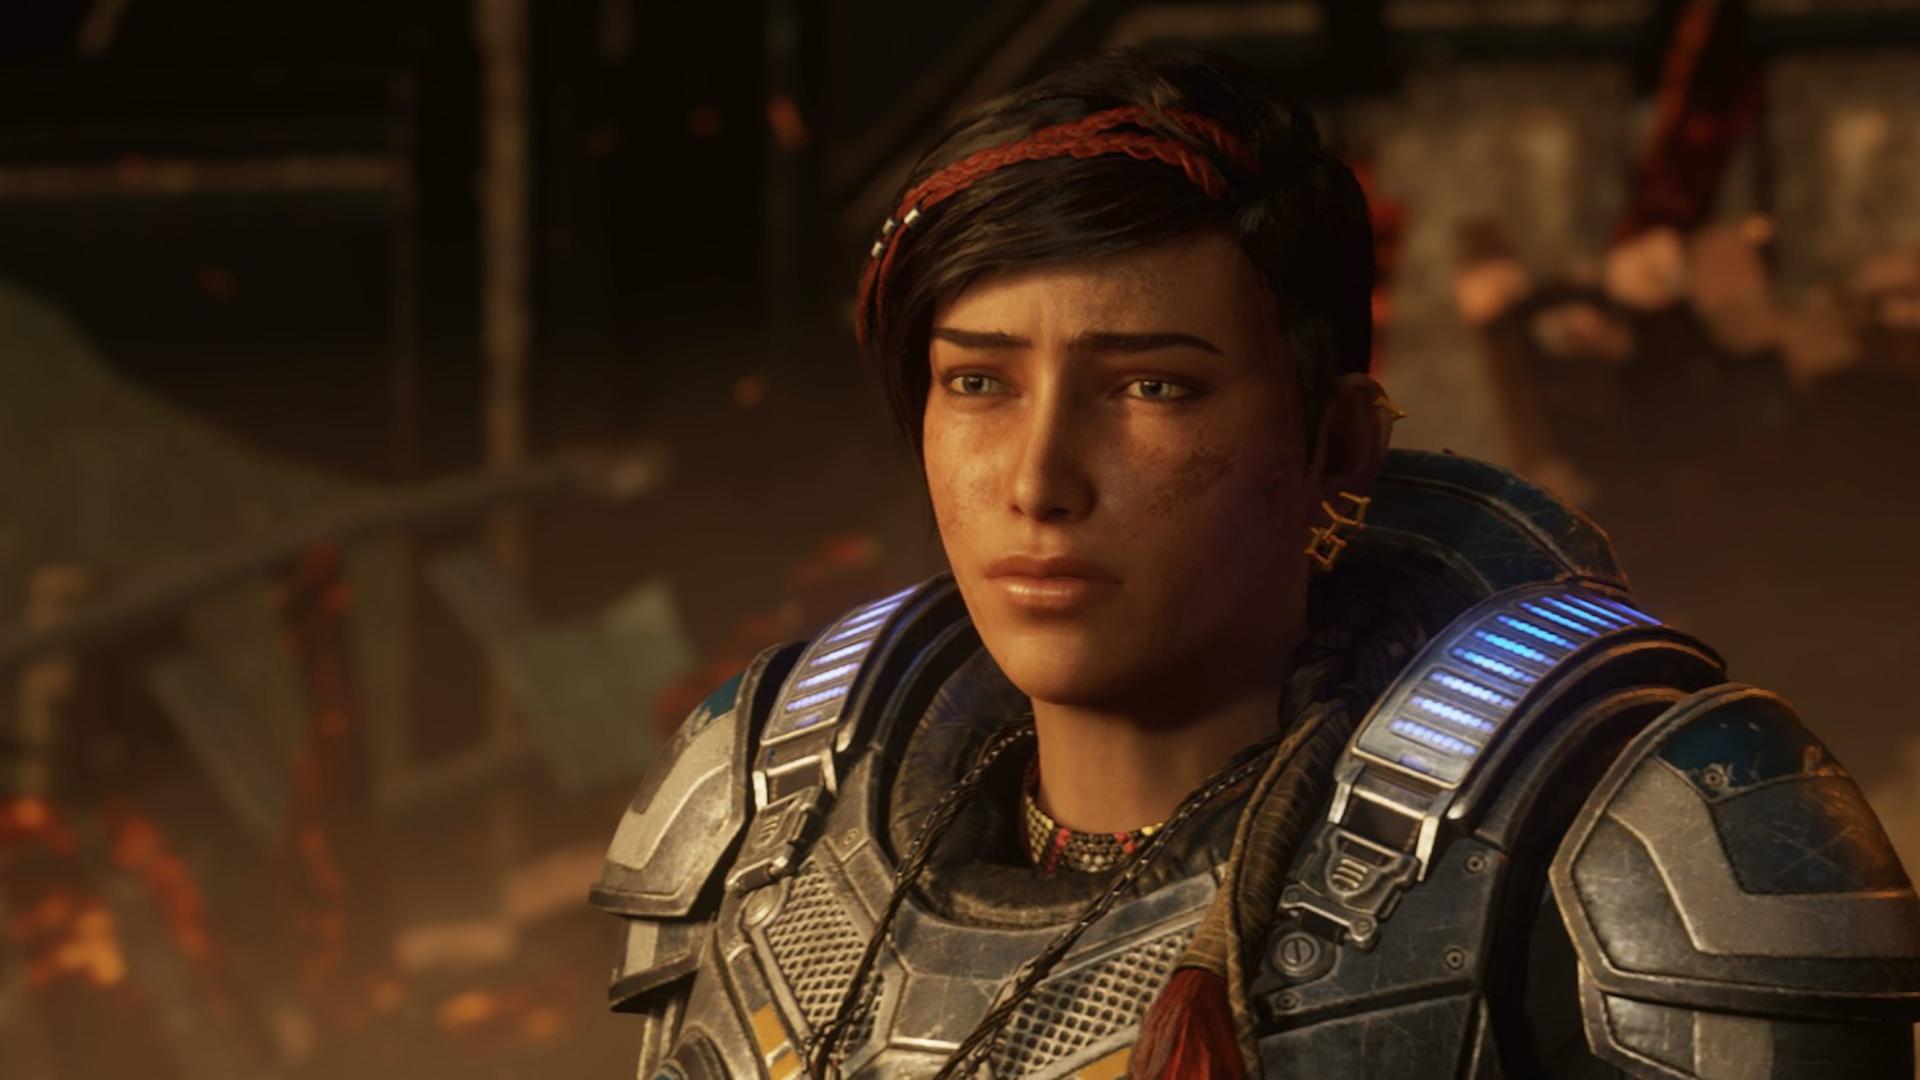 Kait Diaz, the first female lead in a Gears game